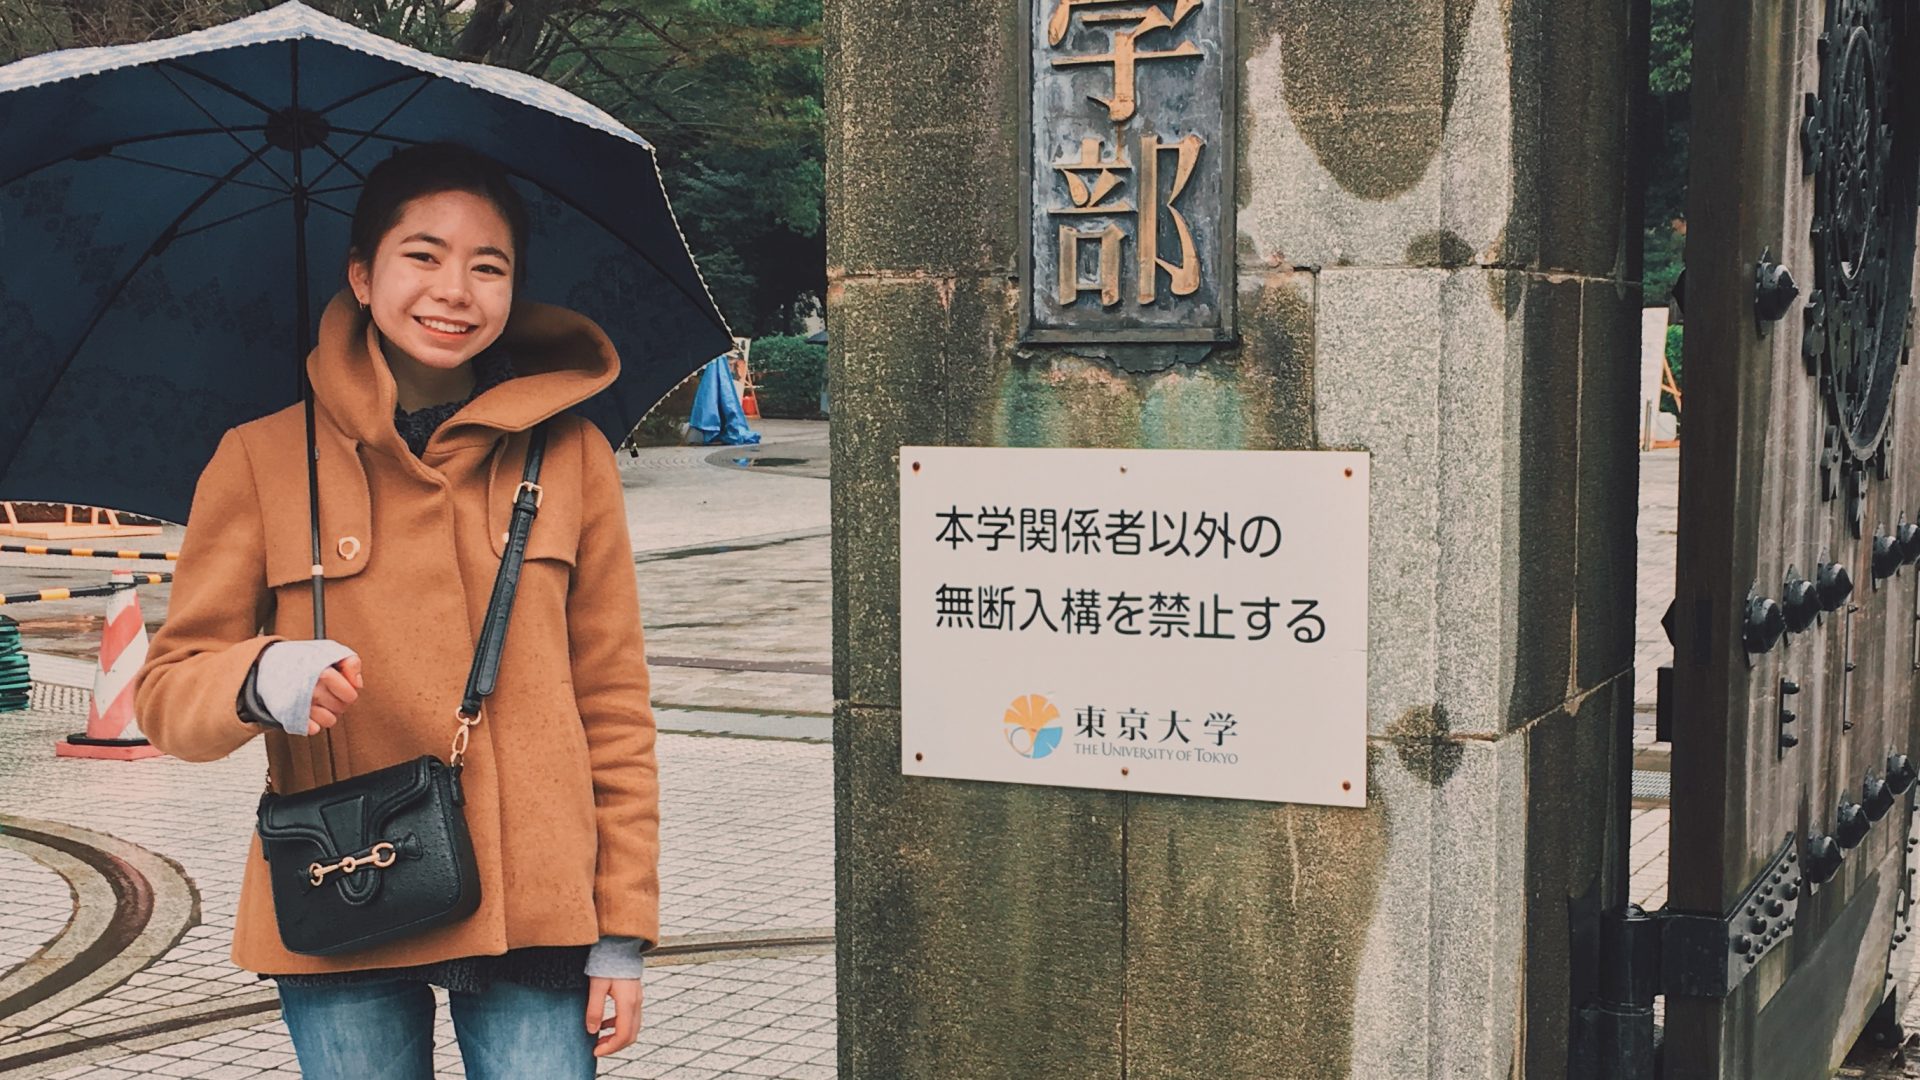 Emi, holding an umbrella, standing in front of the University of Tokyo entrance gate.